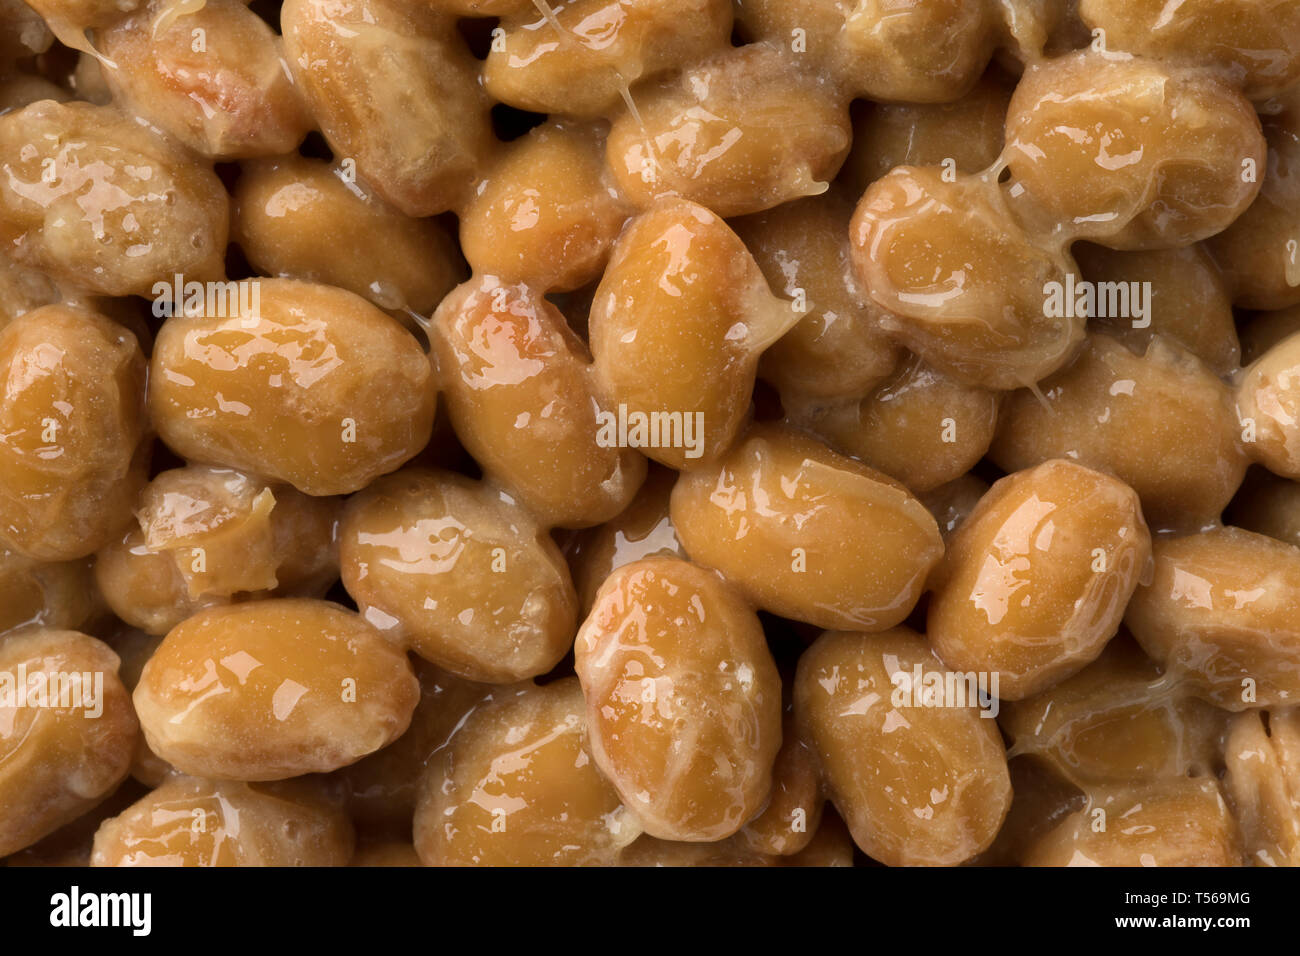 Japanese fermented soybeans called natto full frame, close up Stock Photo